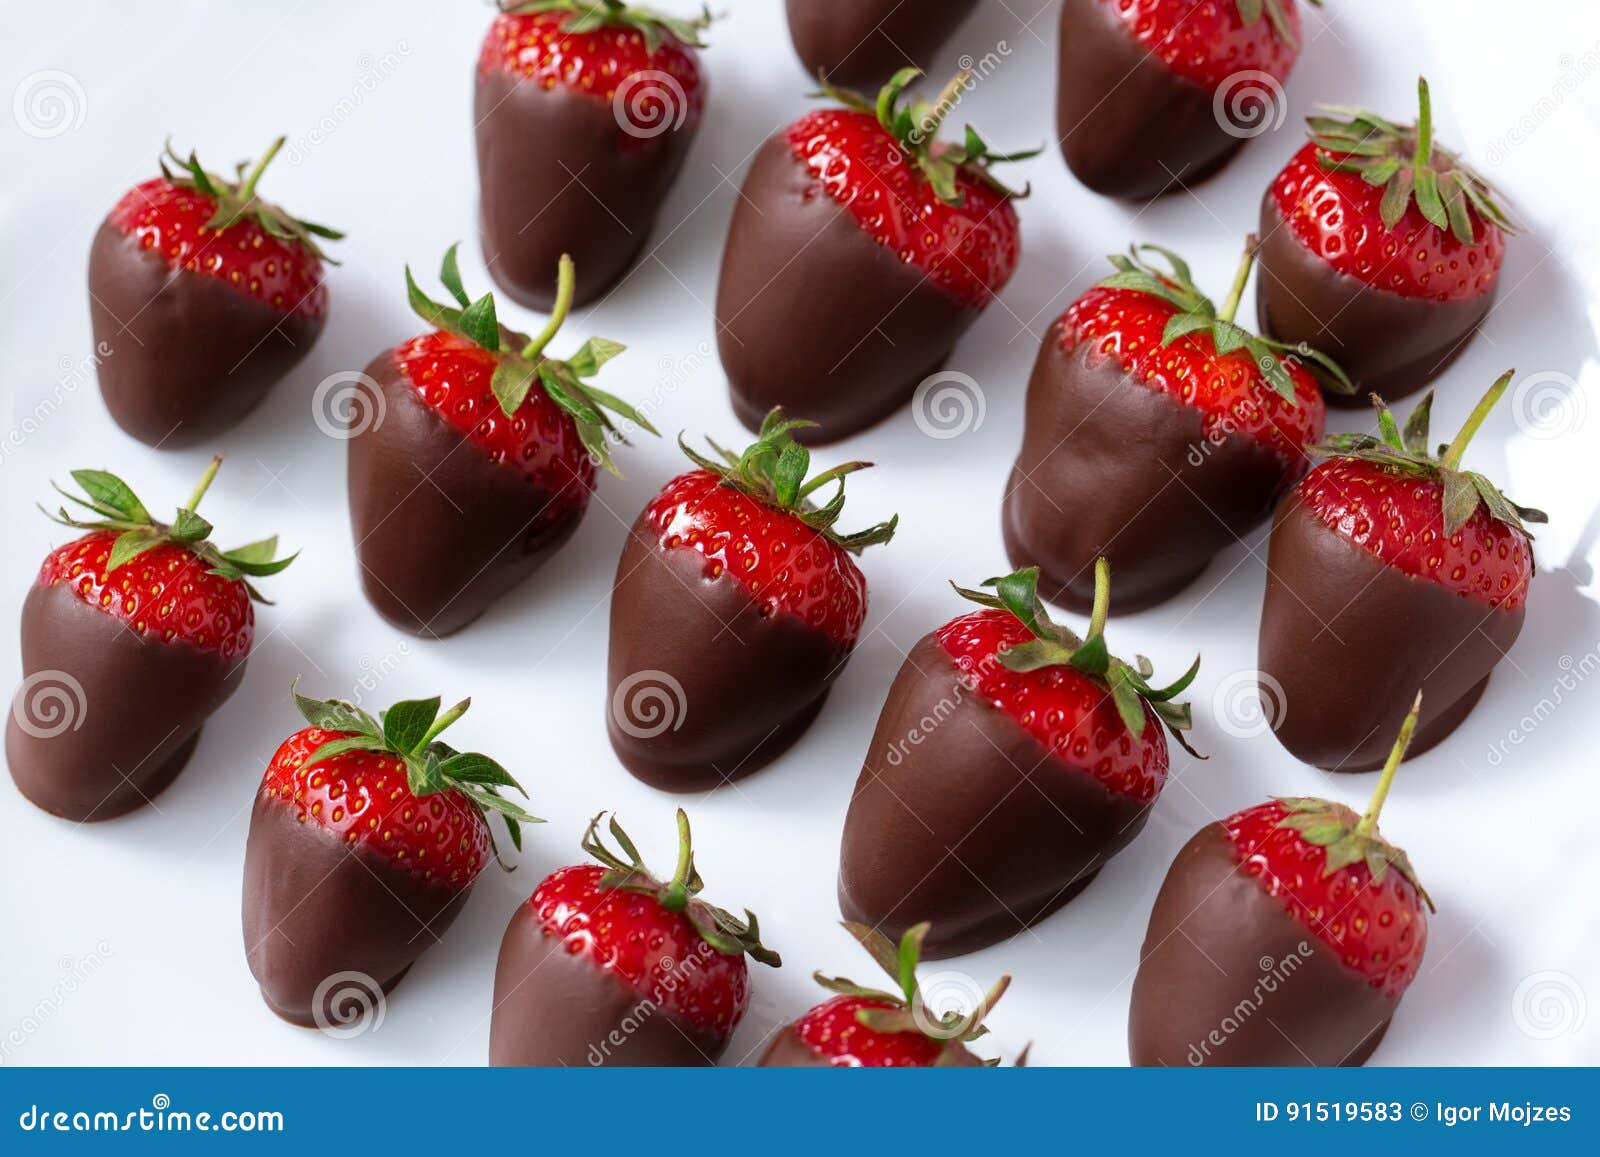 Chocolate Covered Strawberries Stock Image Image Of